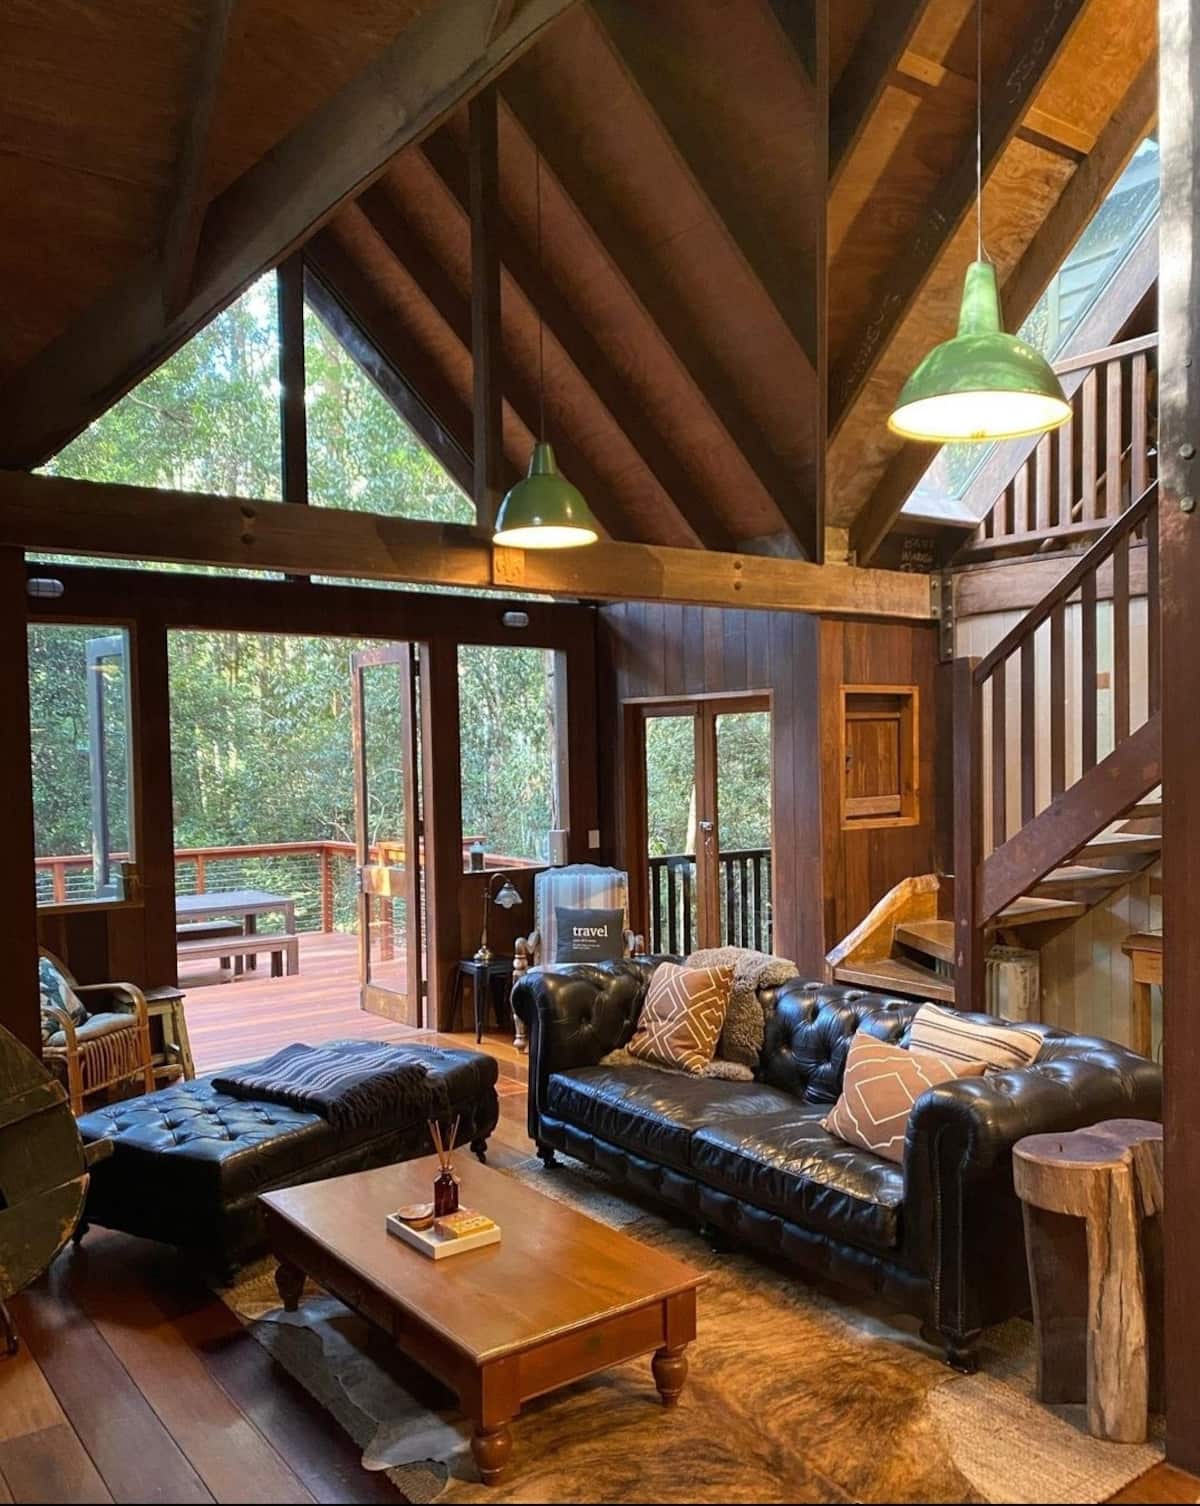 lounge room of a treehouse cabin looking out to a rainforest